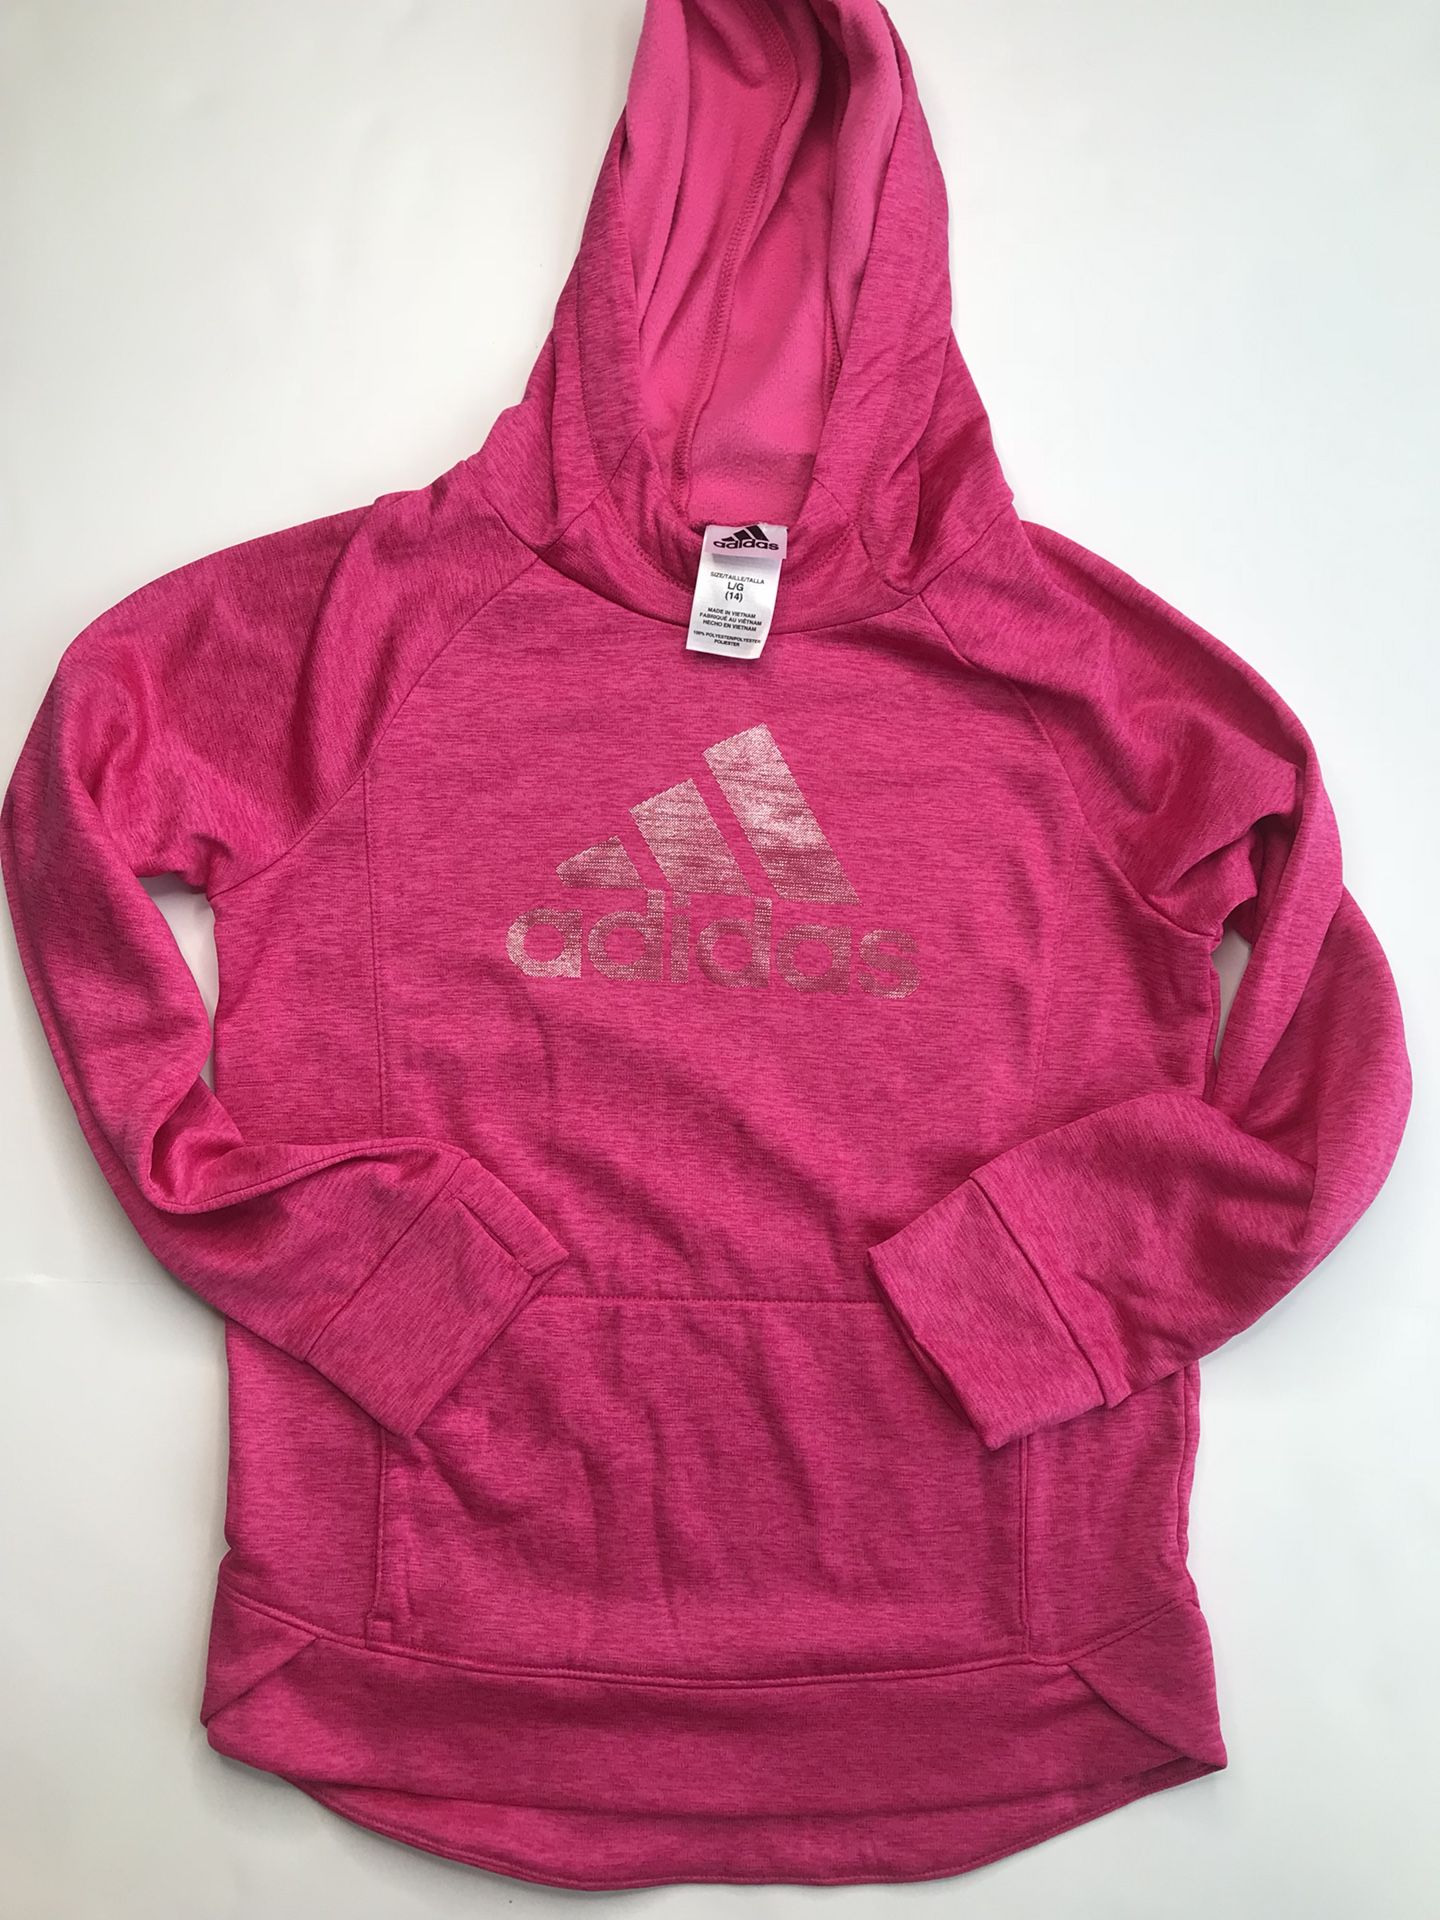 Hot pink adidas hoodie kids large adult small